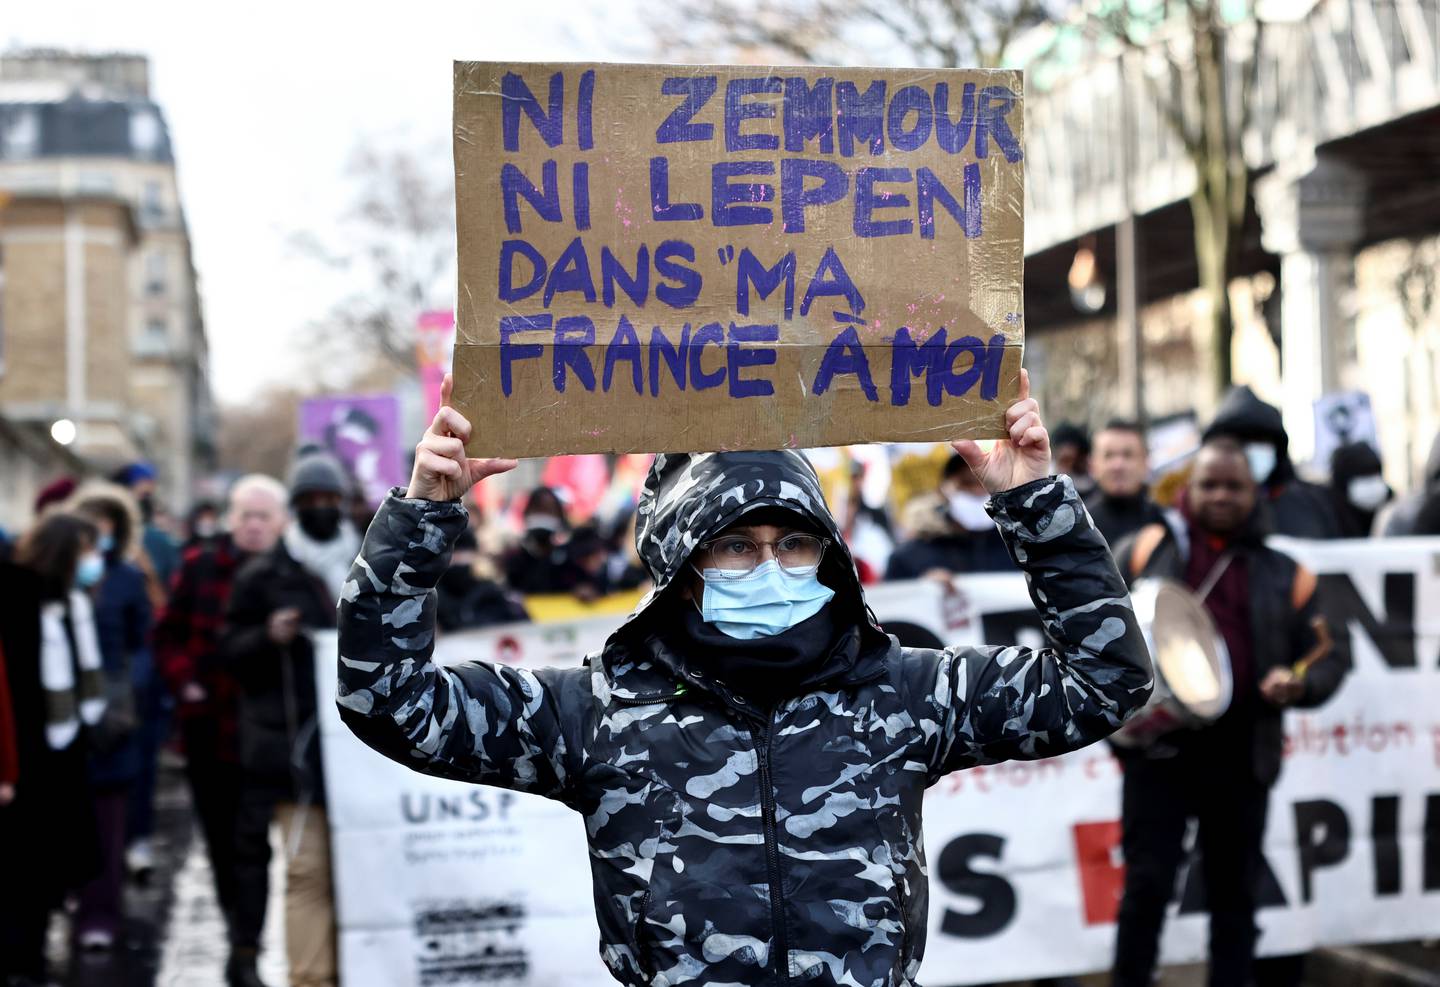 A protester during a demonstration against French far-right commentator Eric Zemmour, a candidate in the 2022 French presidential election, in Paris, France, on December 5, 2021. Reuters